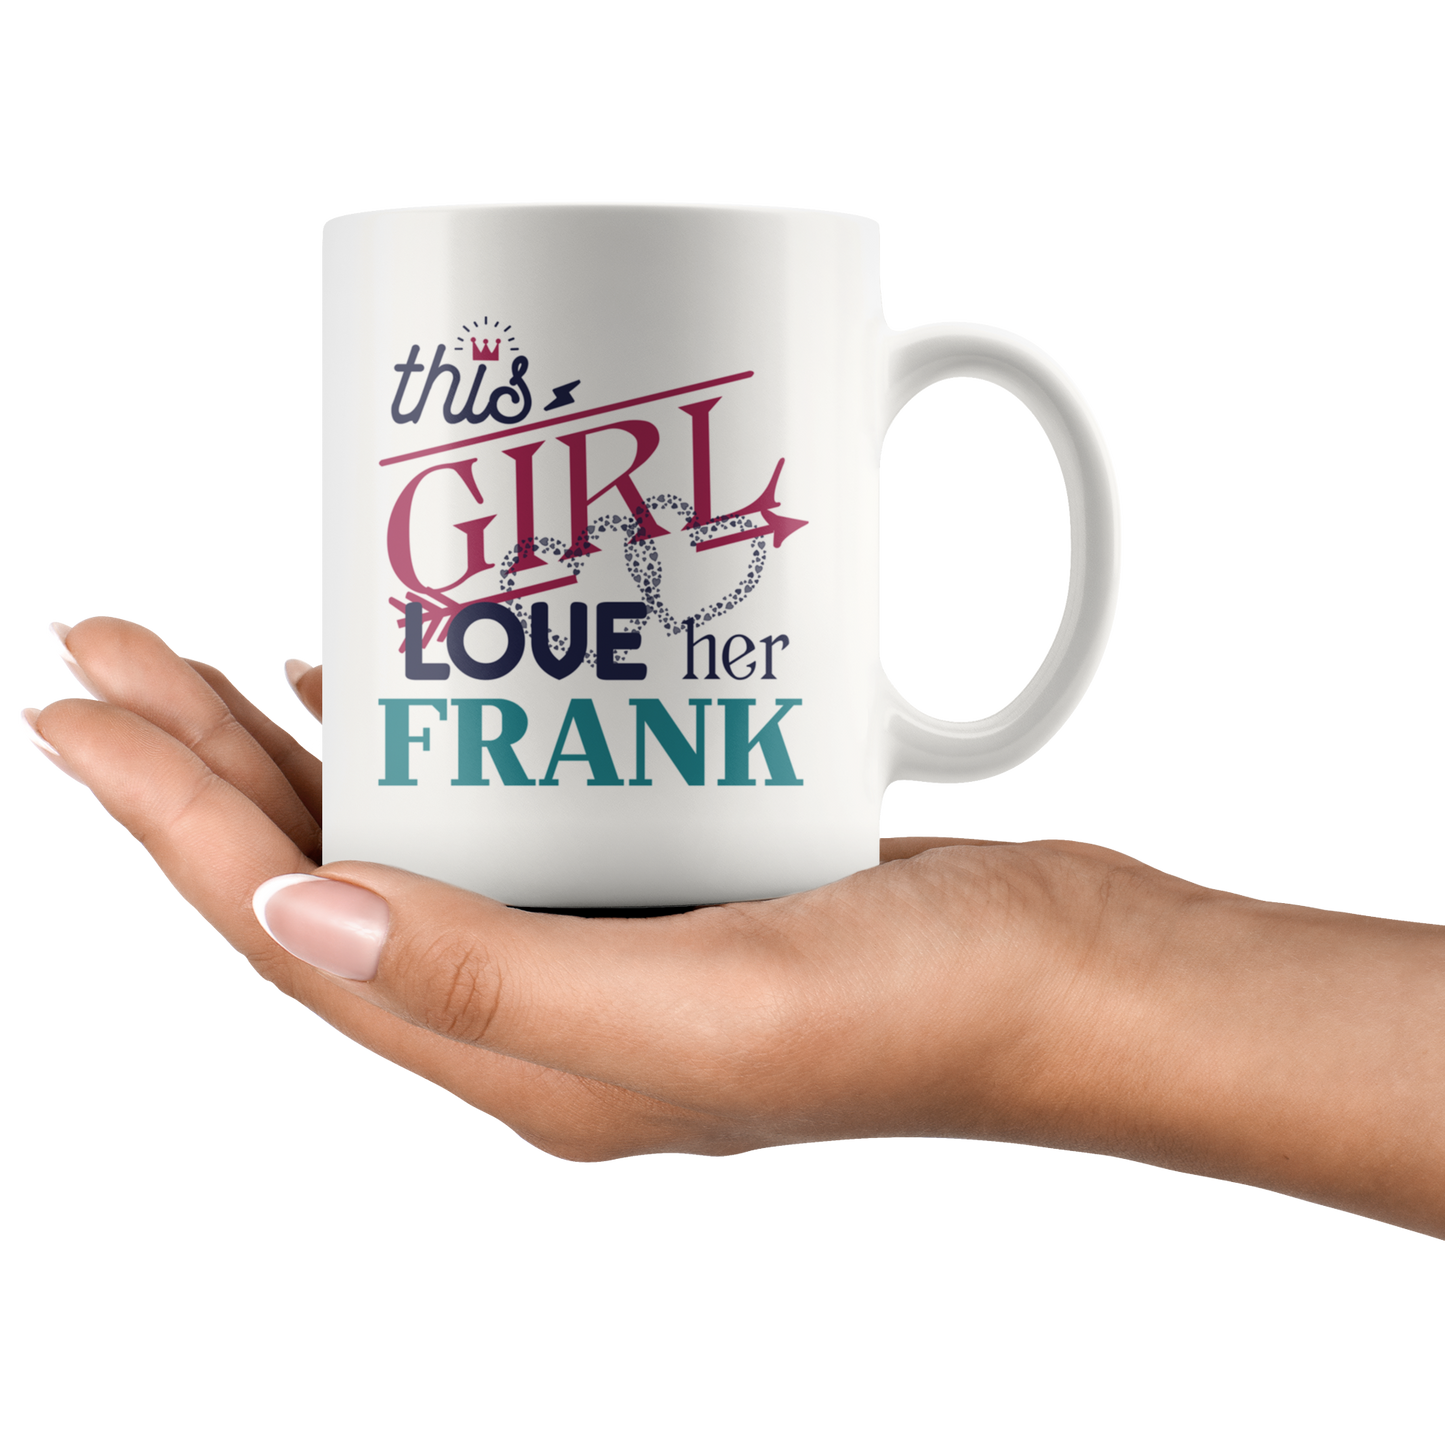 ND20746669-sp-22873 - Funny Mug Gifts For Her, Wife - This Girl Love Her Husband F